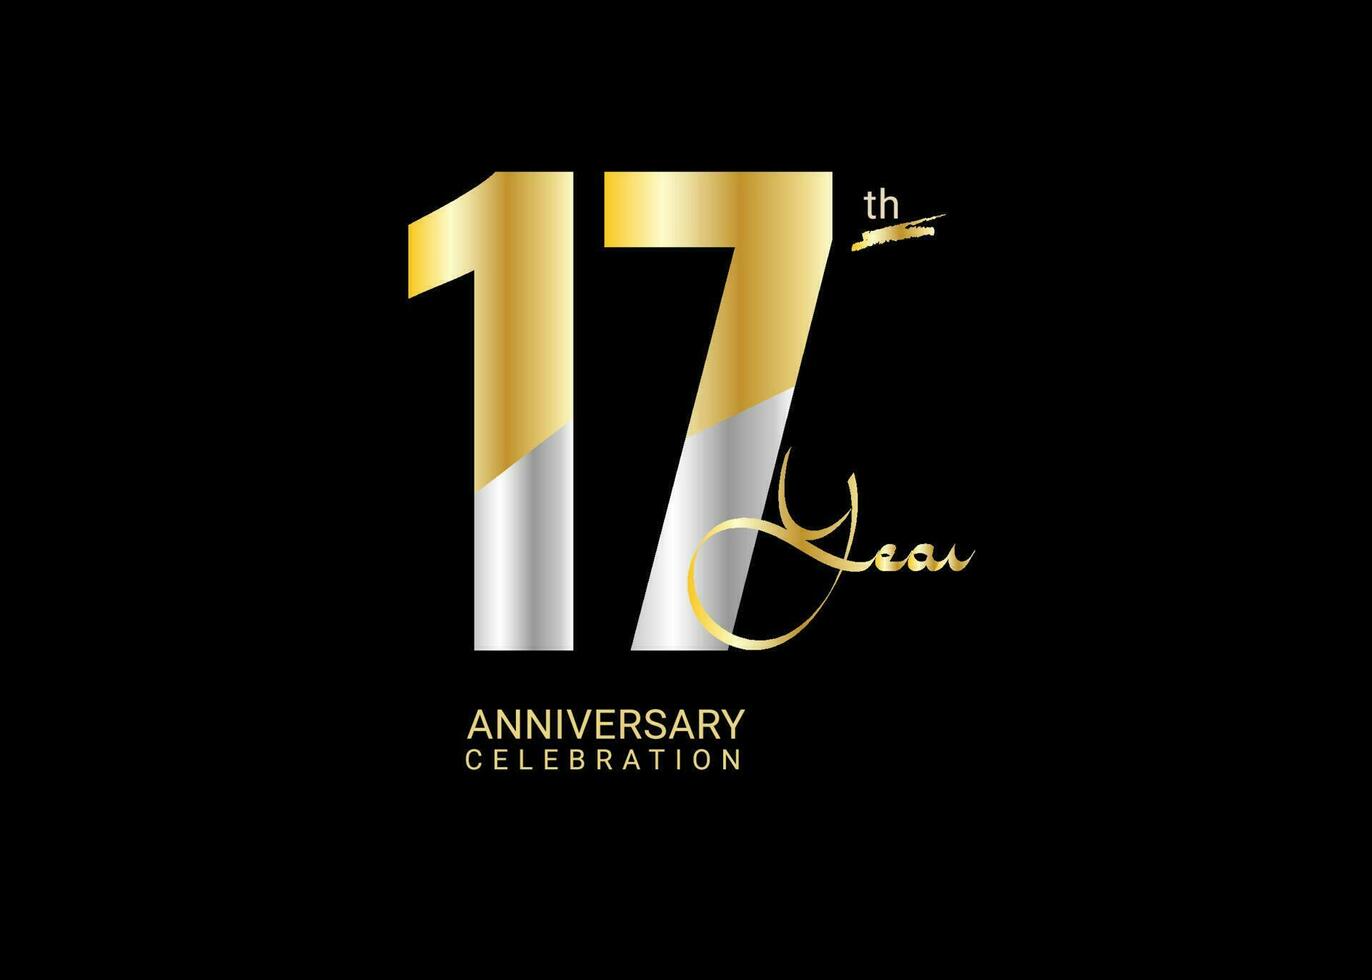 17 Years Anniversary Celebration gold and silver Vector Template, 17 number logo design, 17th Birthday Logo,  logotype Anniversary, Vector Anniversary For Celebration, poster, Invitation Card